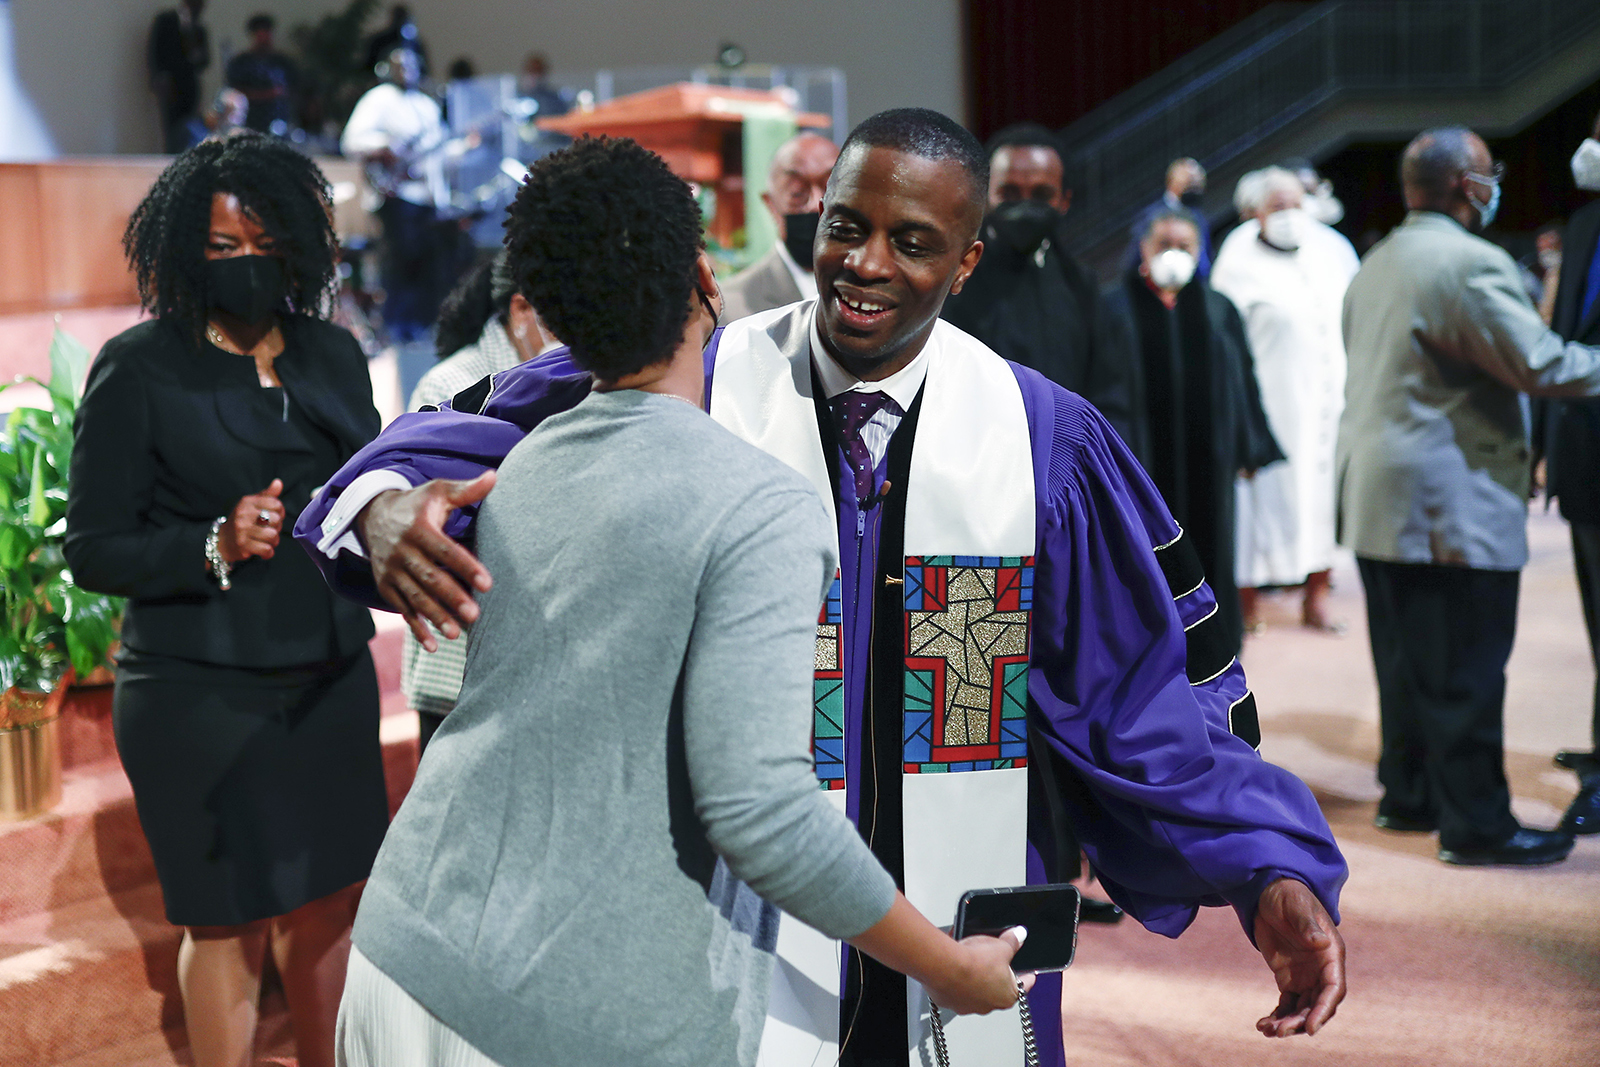 Rev. Dante Quick, greets people as he preaches during a church service at the First Baptist Church of Lincoln Gardens on Sunday, May 22, 2022, in Somerset, N.J. (AP Photo/Eduardo Munoz Alvarez)